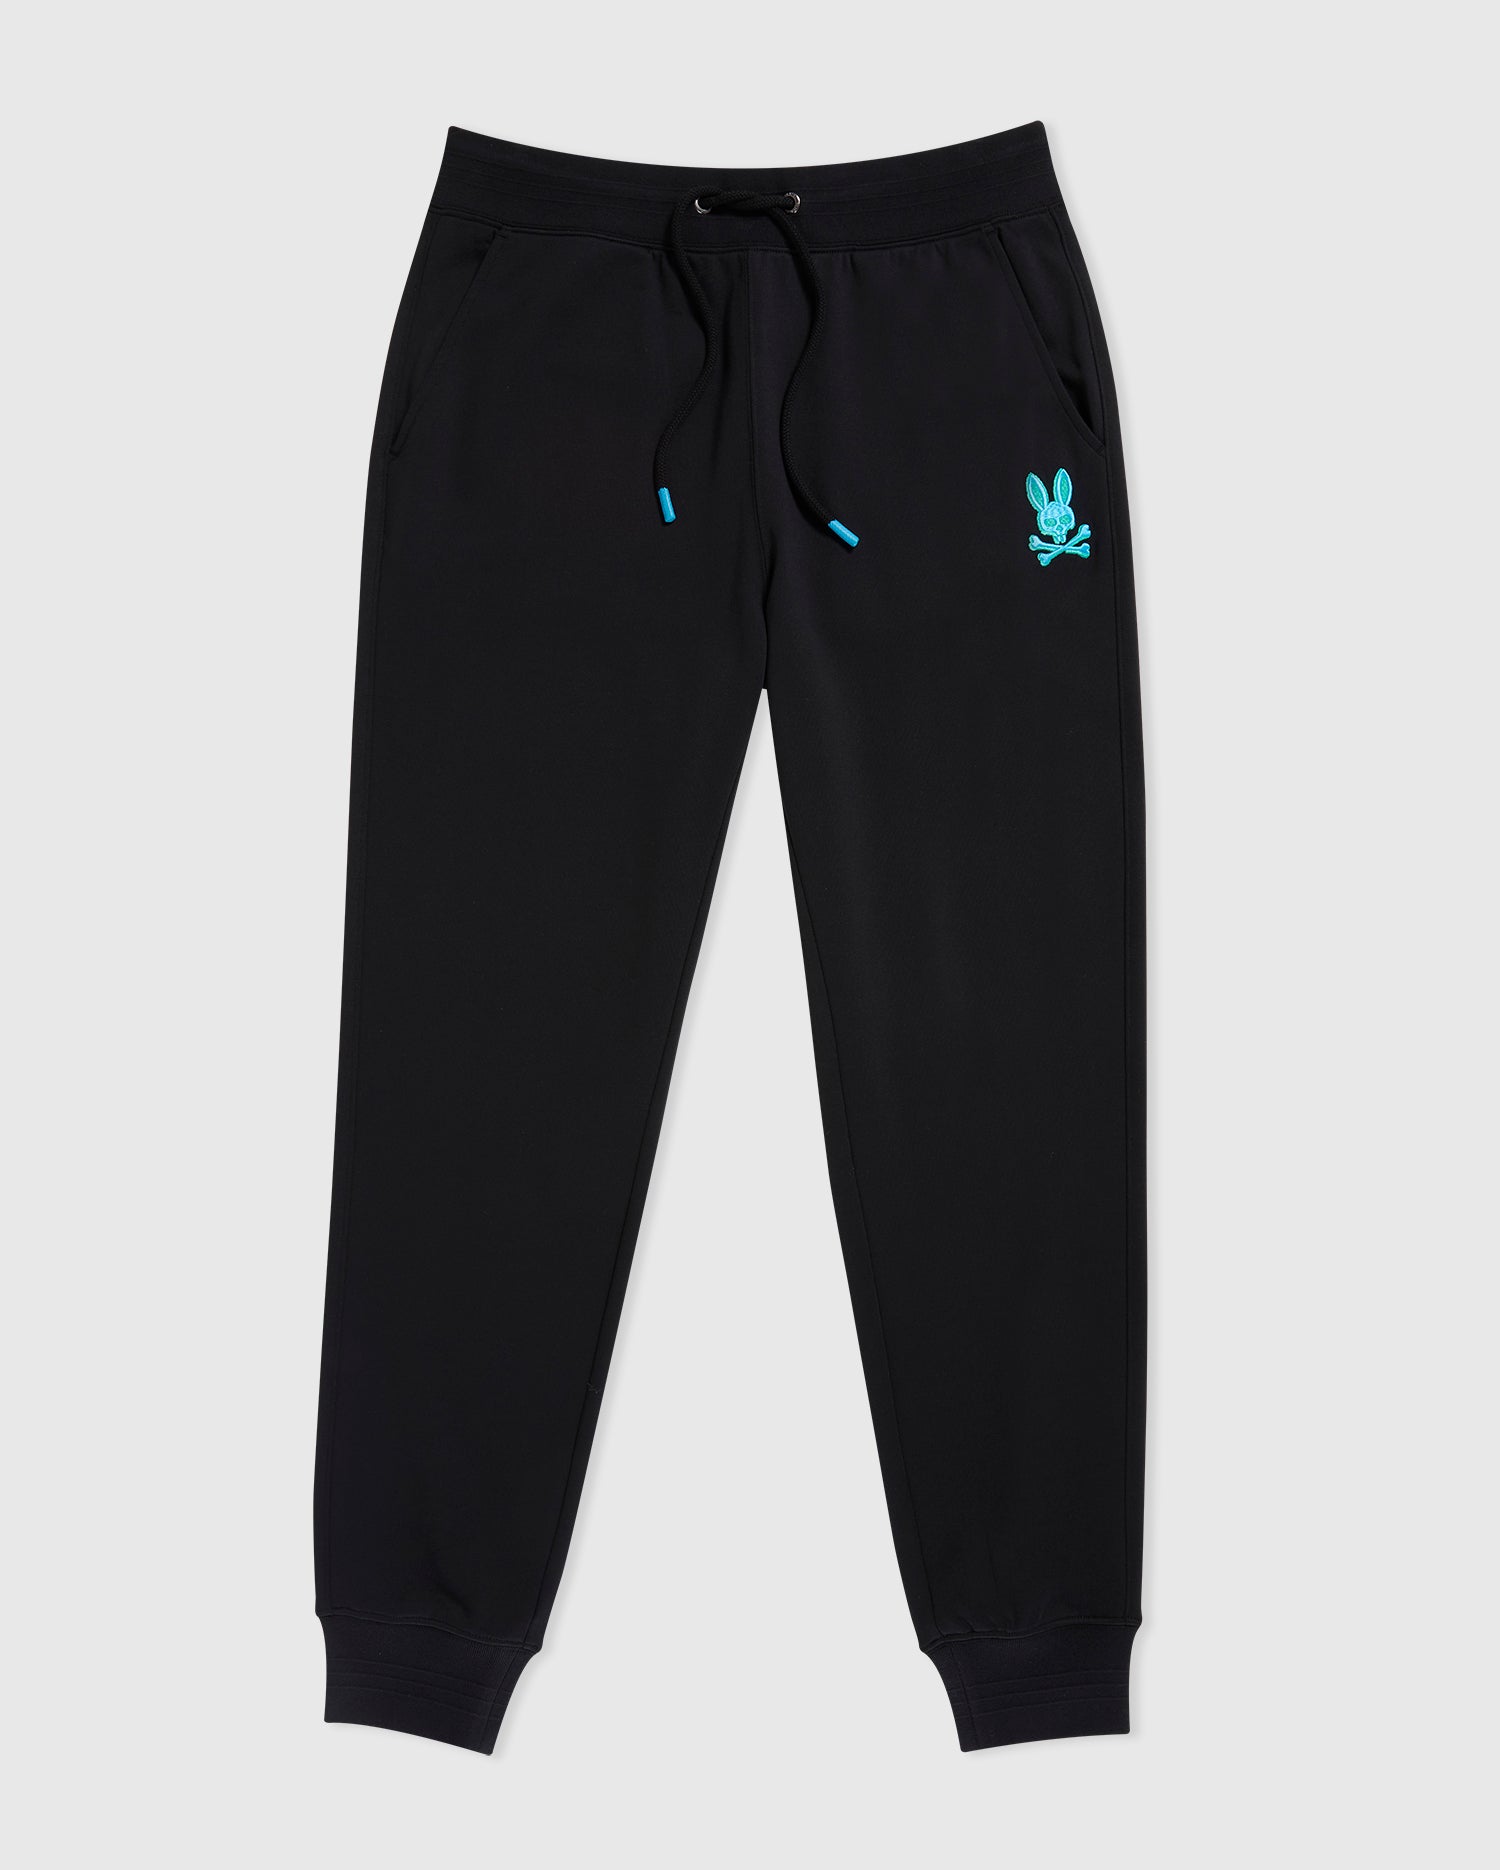 Buy Psycho Bunny Bennett Big & Tall Sweatpant at In Style